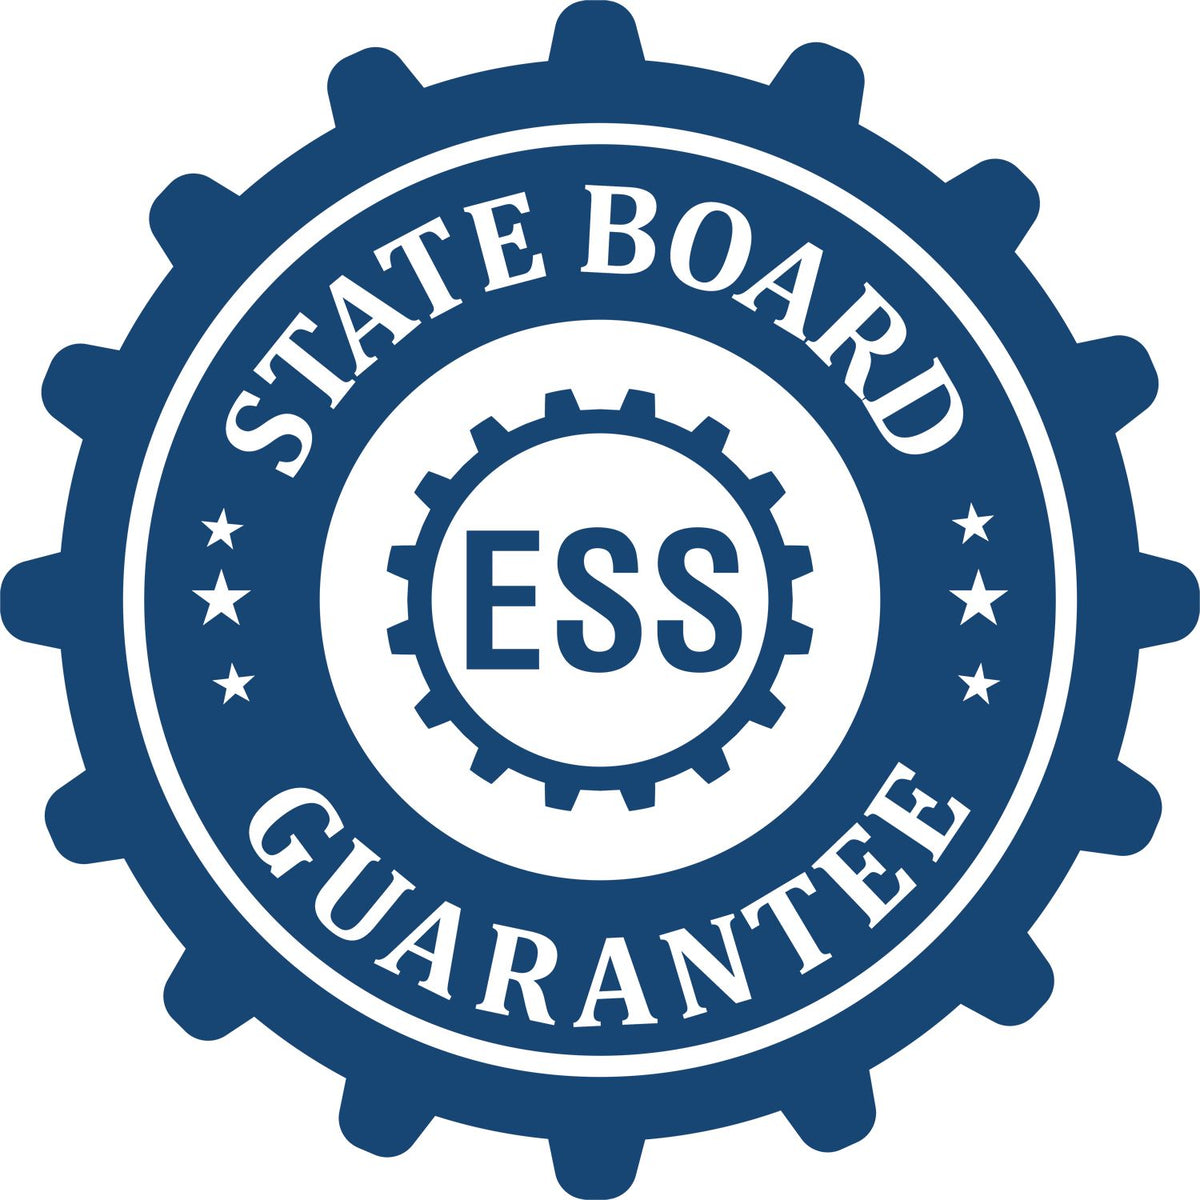 An emblem in a gear shape illustrating a state board guarantee for the Gift Hawaii Geologist Seal